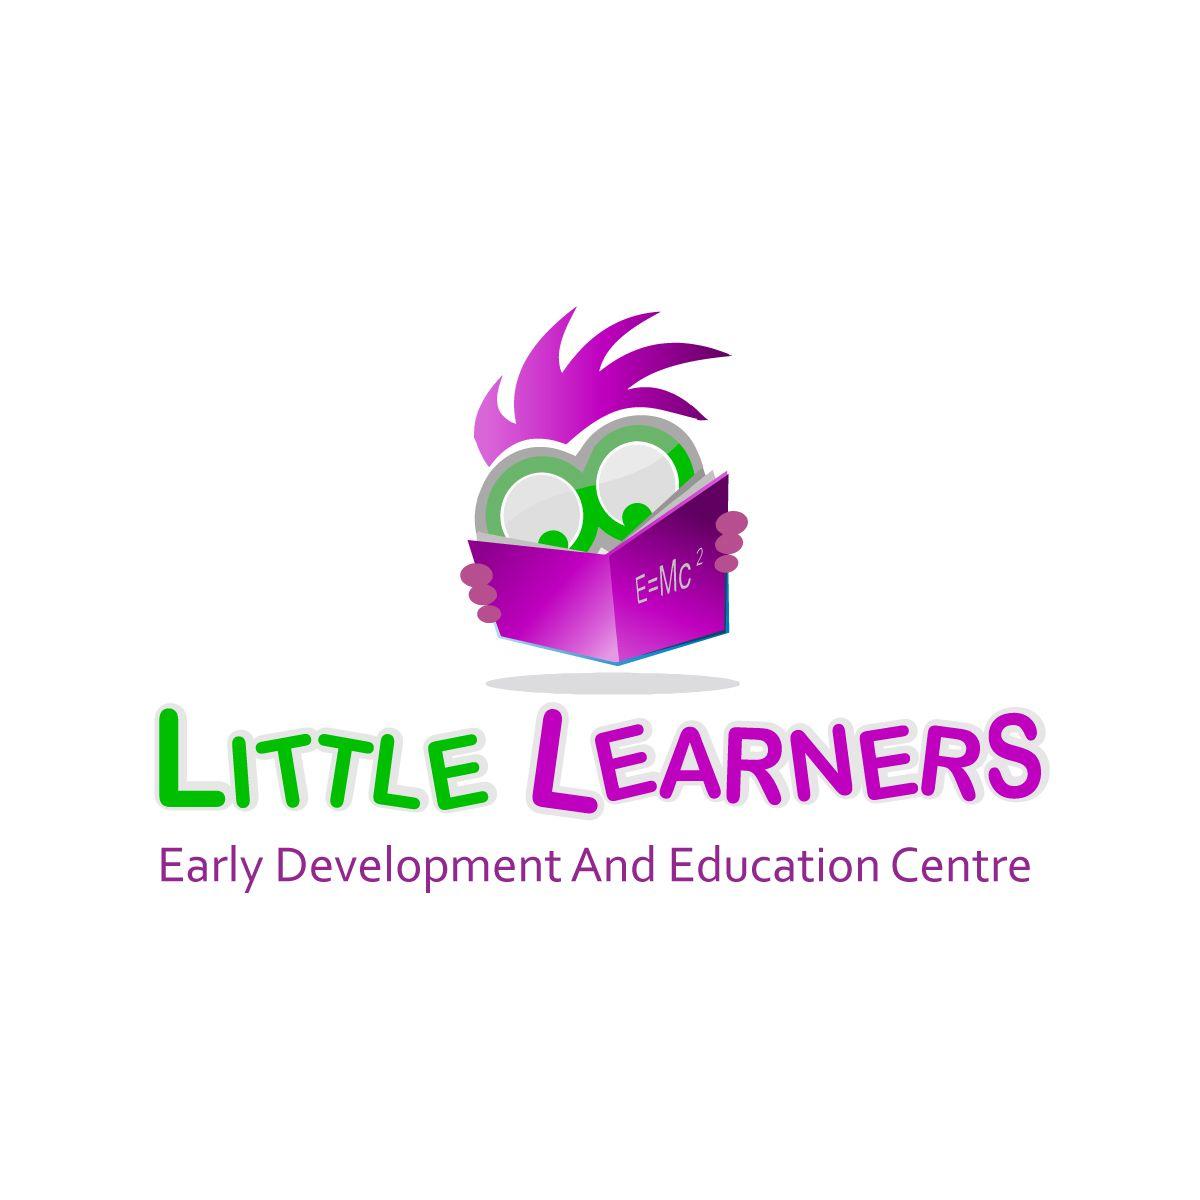 Maximal Logo - Bold, Playful, Education Logo Design for Little Learners Early ...